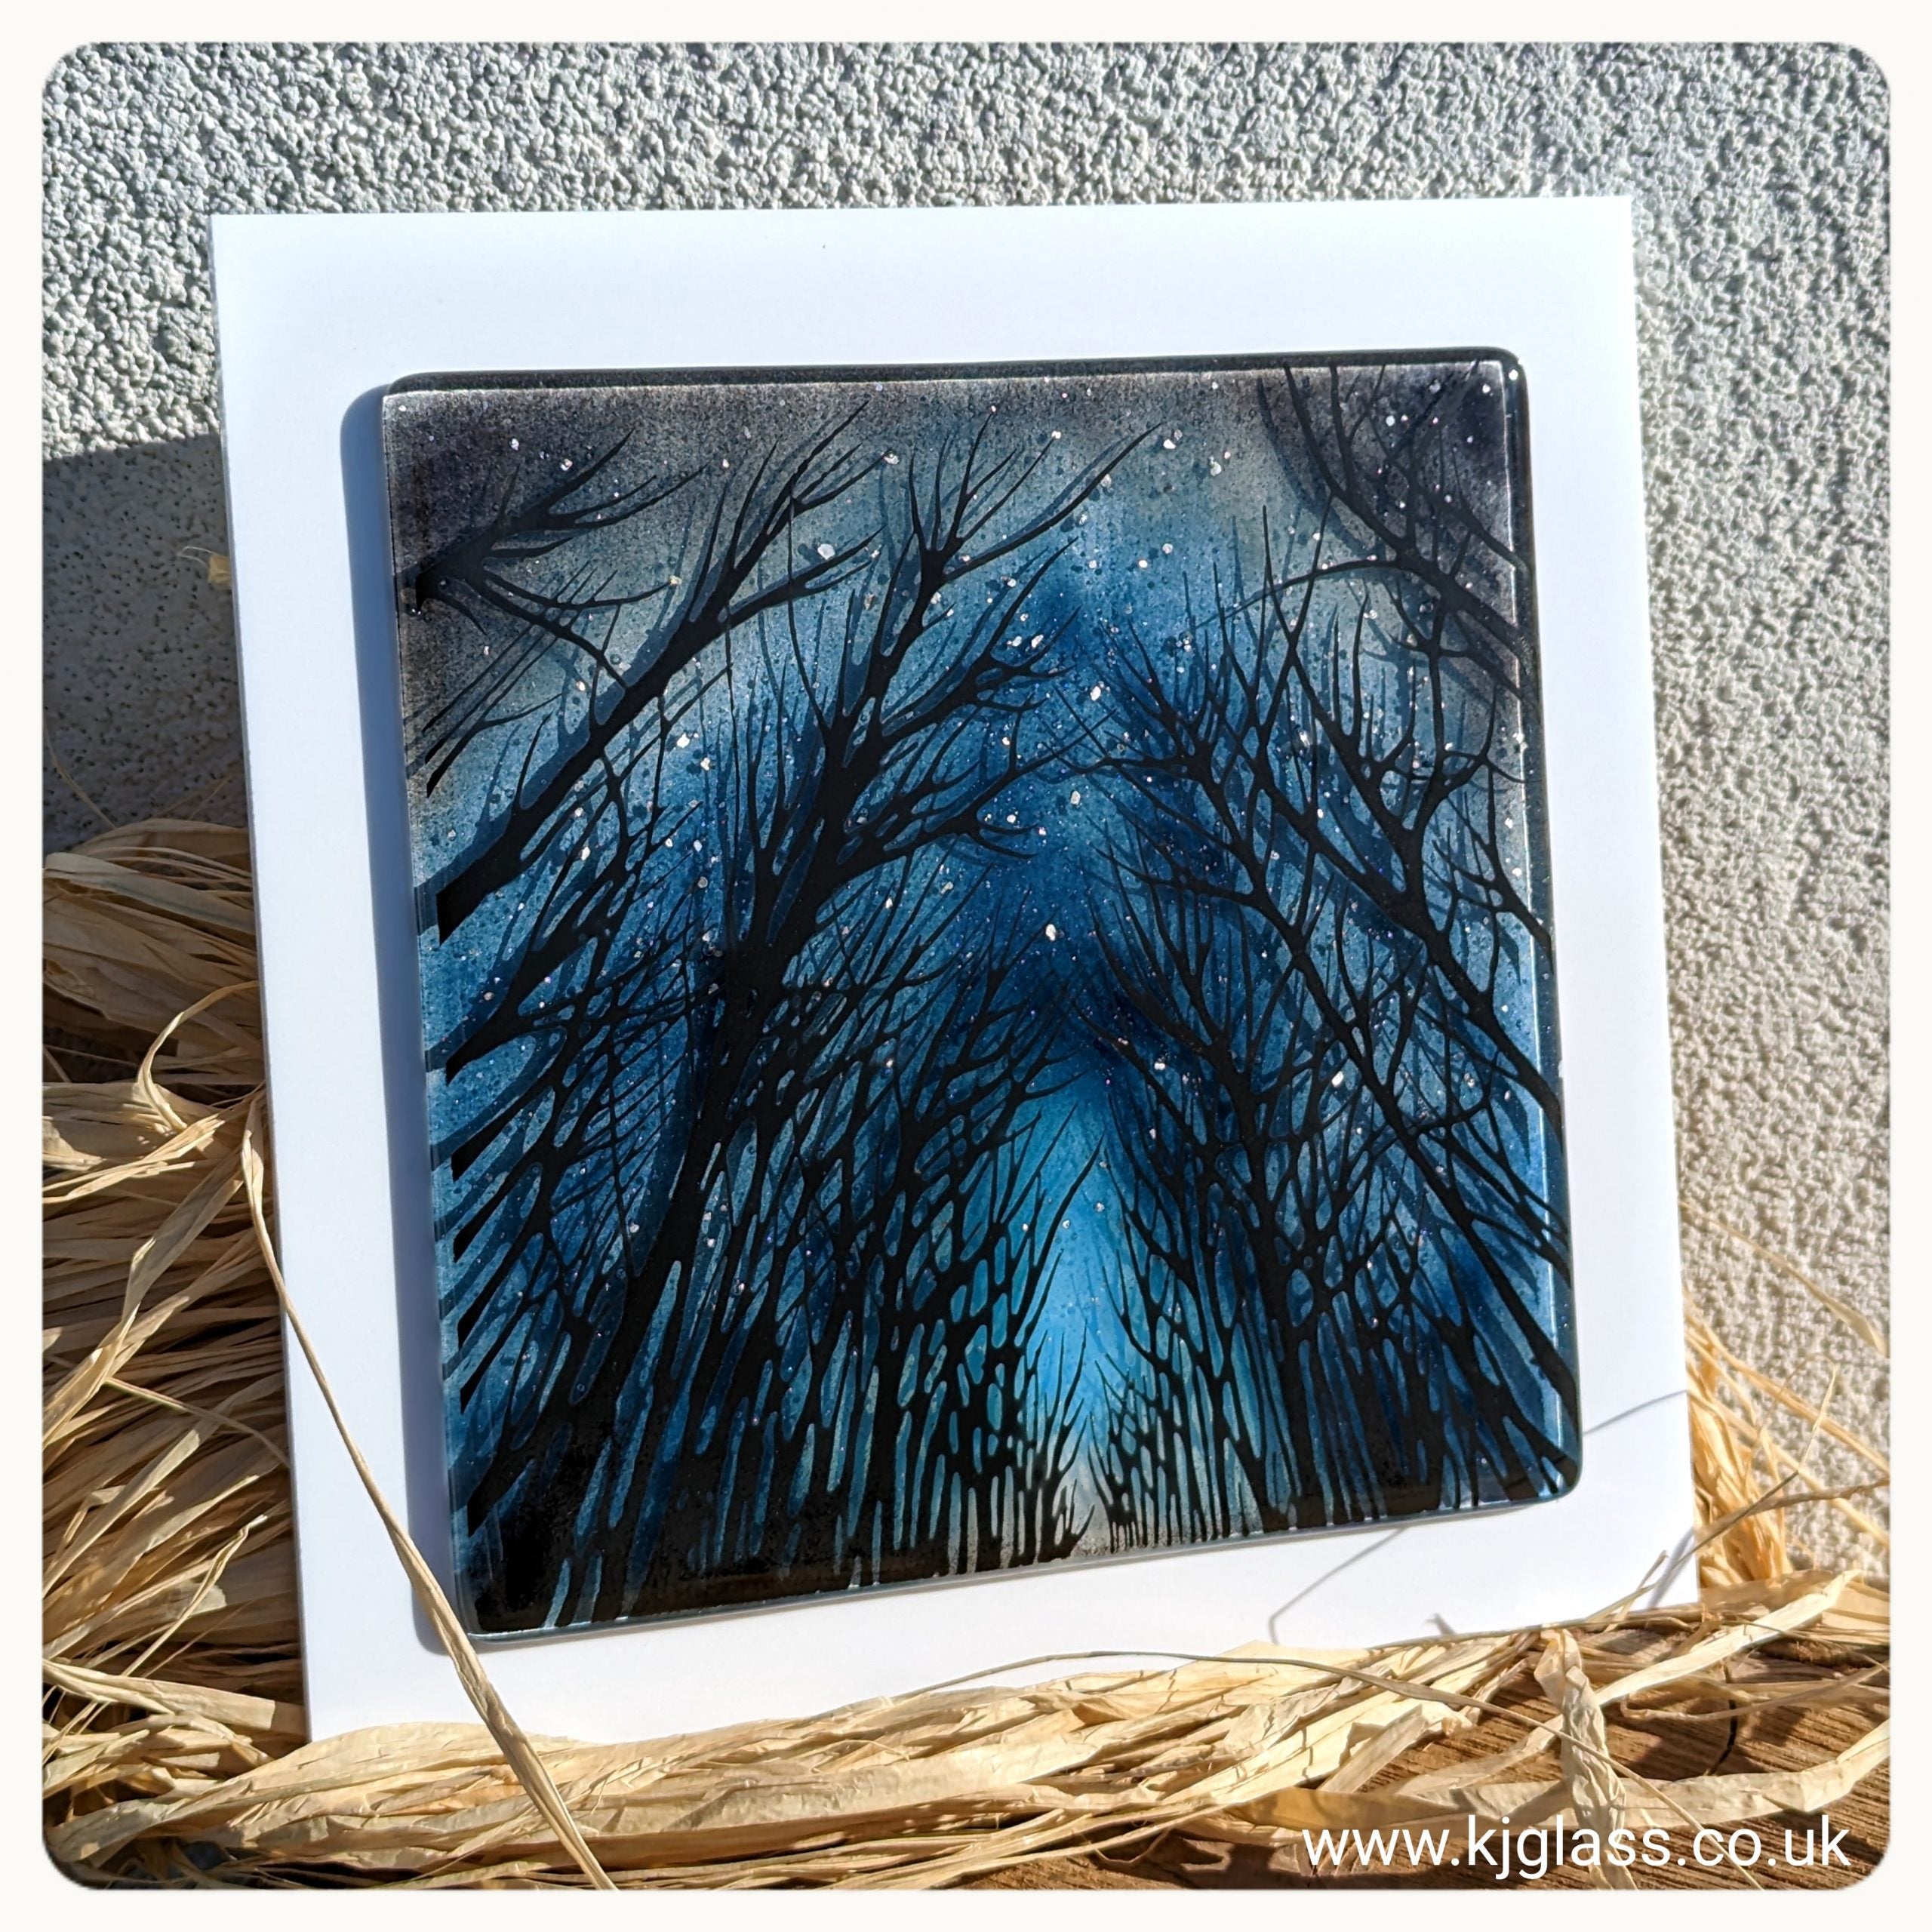 A fabulous art piece depicting a lovely starry night sky looking out from a forest of trees. Trapping glitter stars and powdered blue glass.